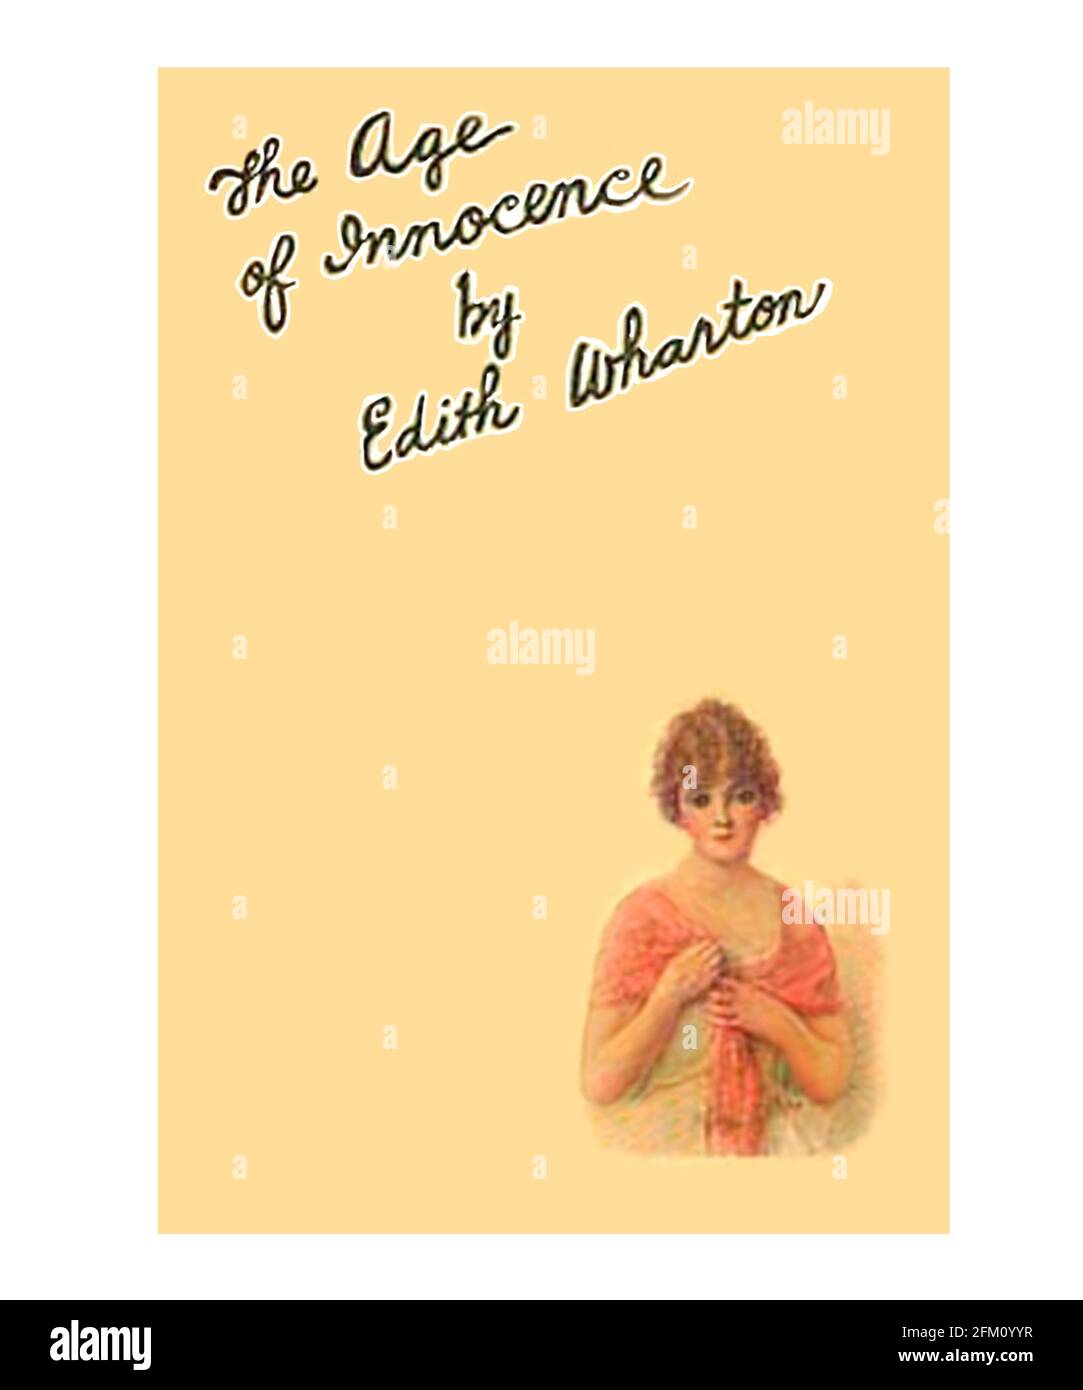 Wharton Edith Book Dust Jacket The Age of Innocence refreshed and reset Stock Photo